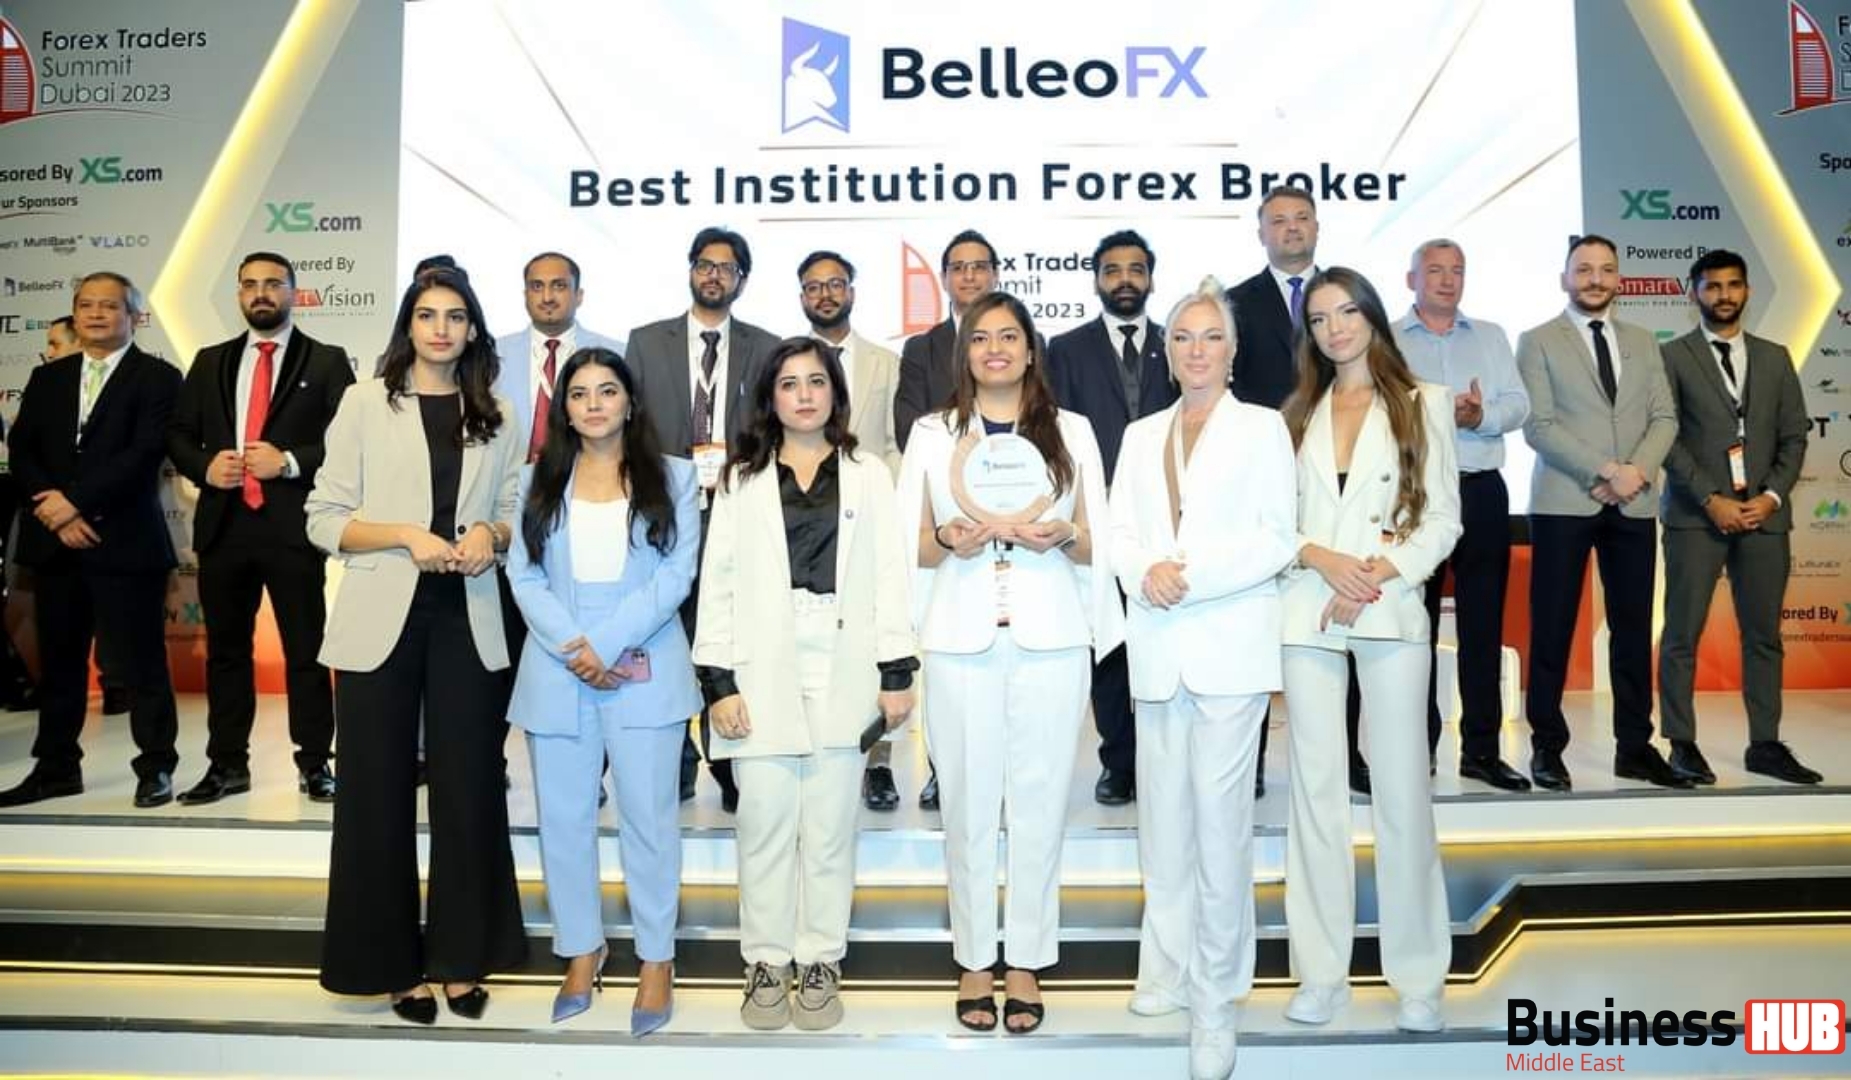 An Unbiased Review of BelleoFX for Aspiring Forex Traders